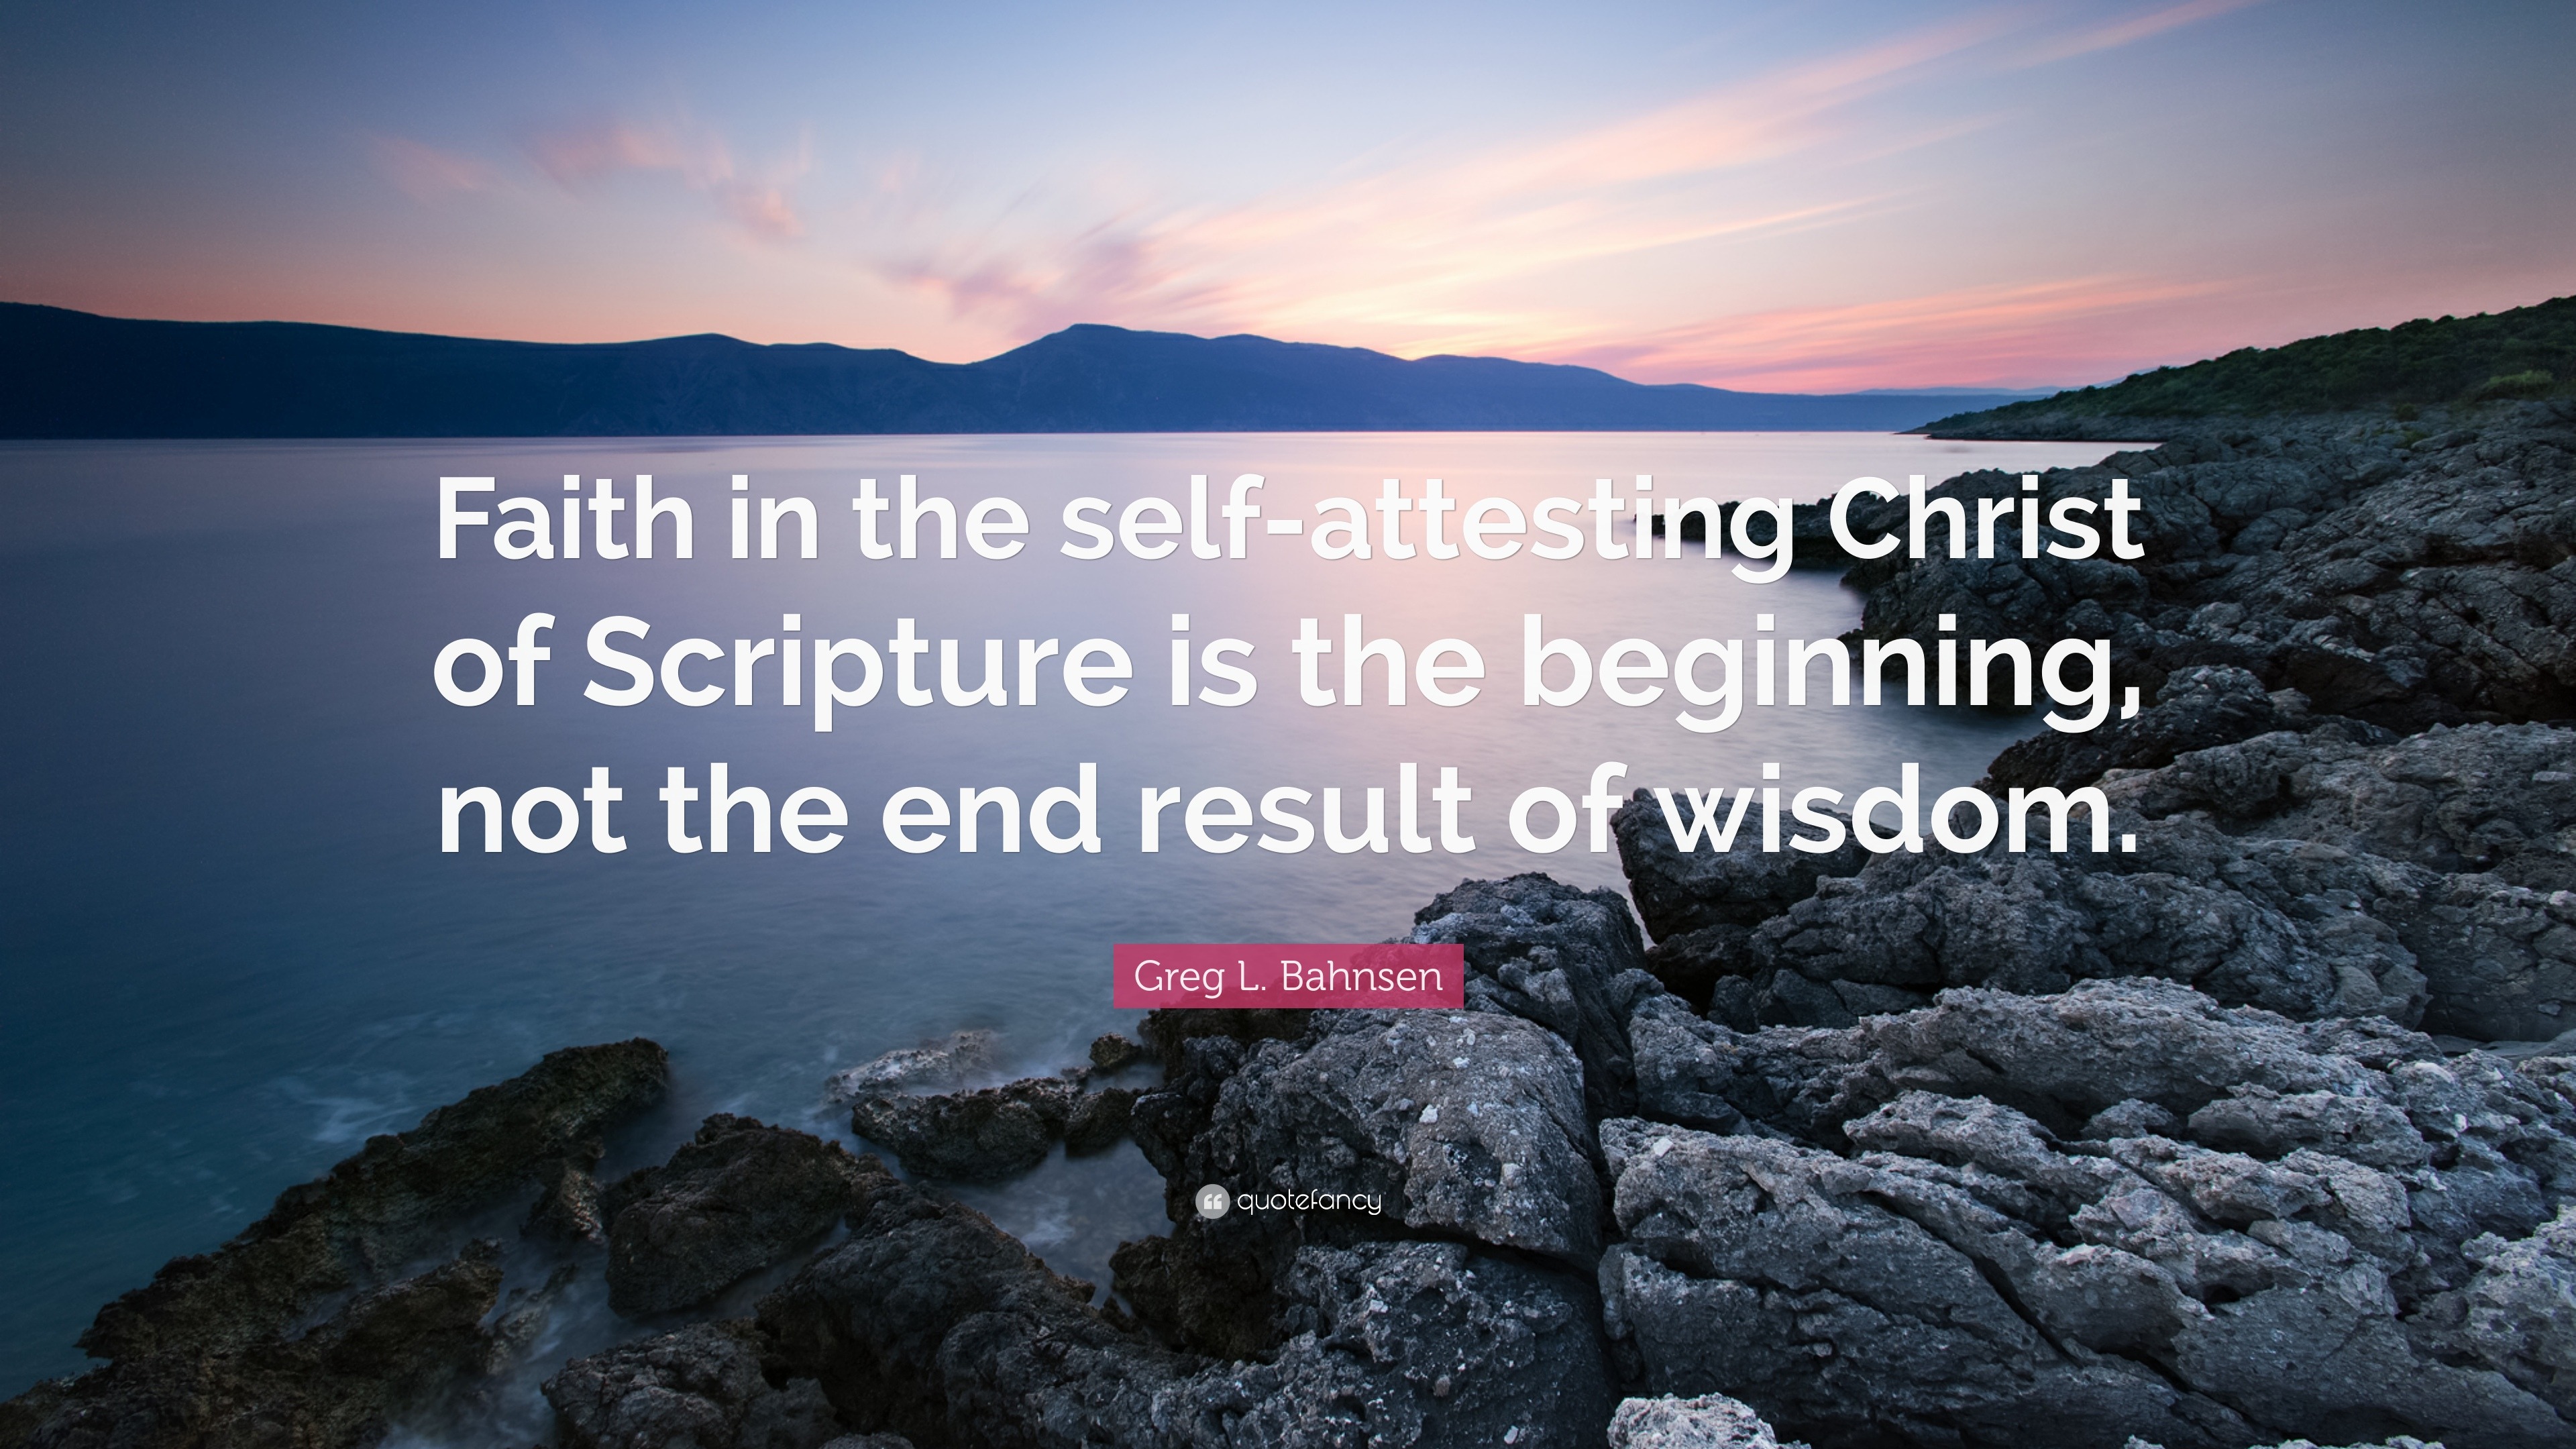 Greg L. Bahnsen Quote: “Faith in the self-attesting Christ of Scripture ...